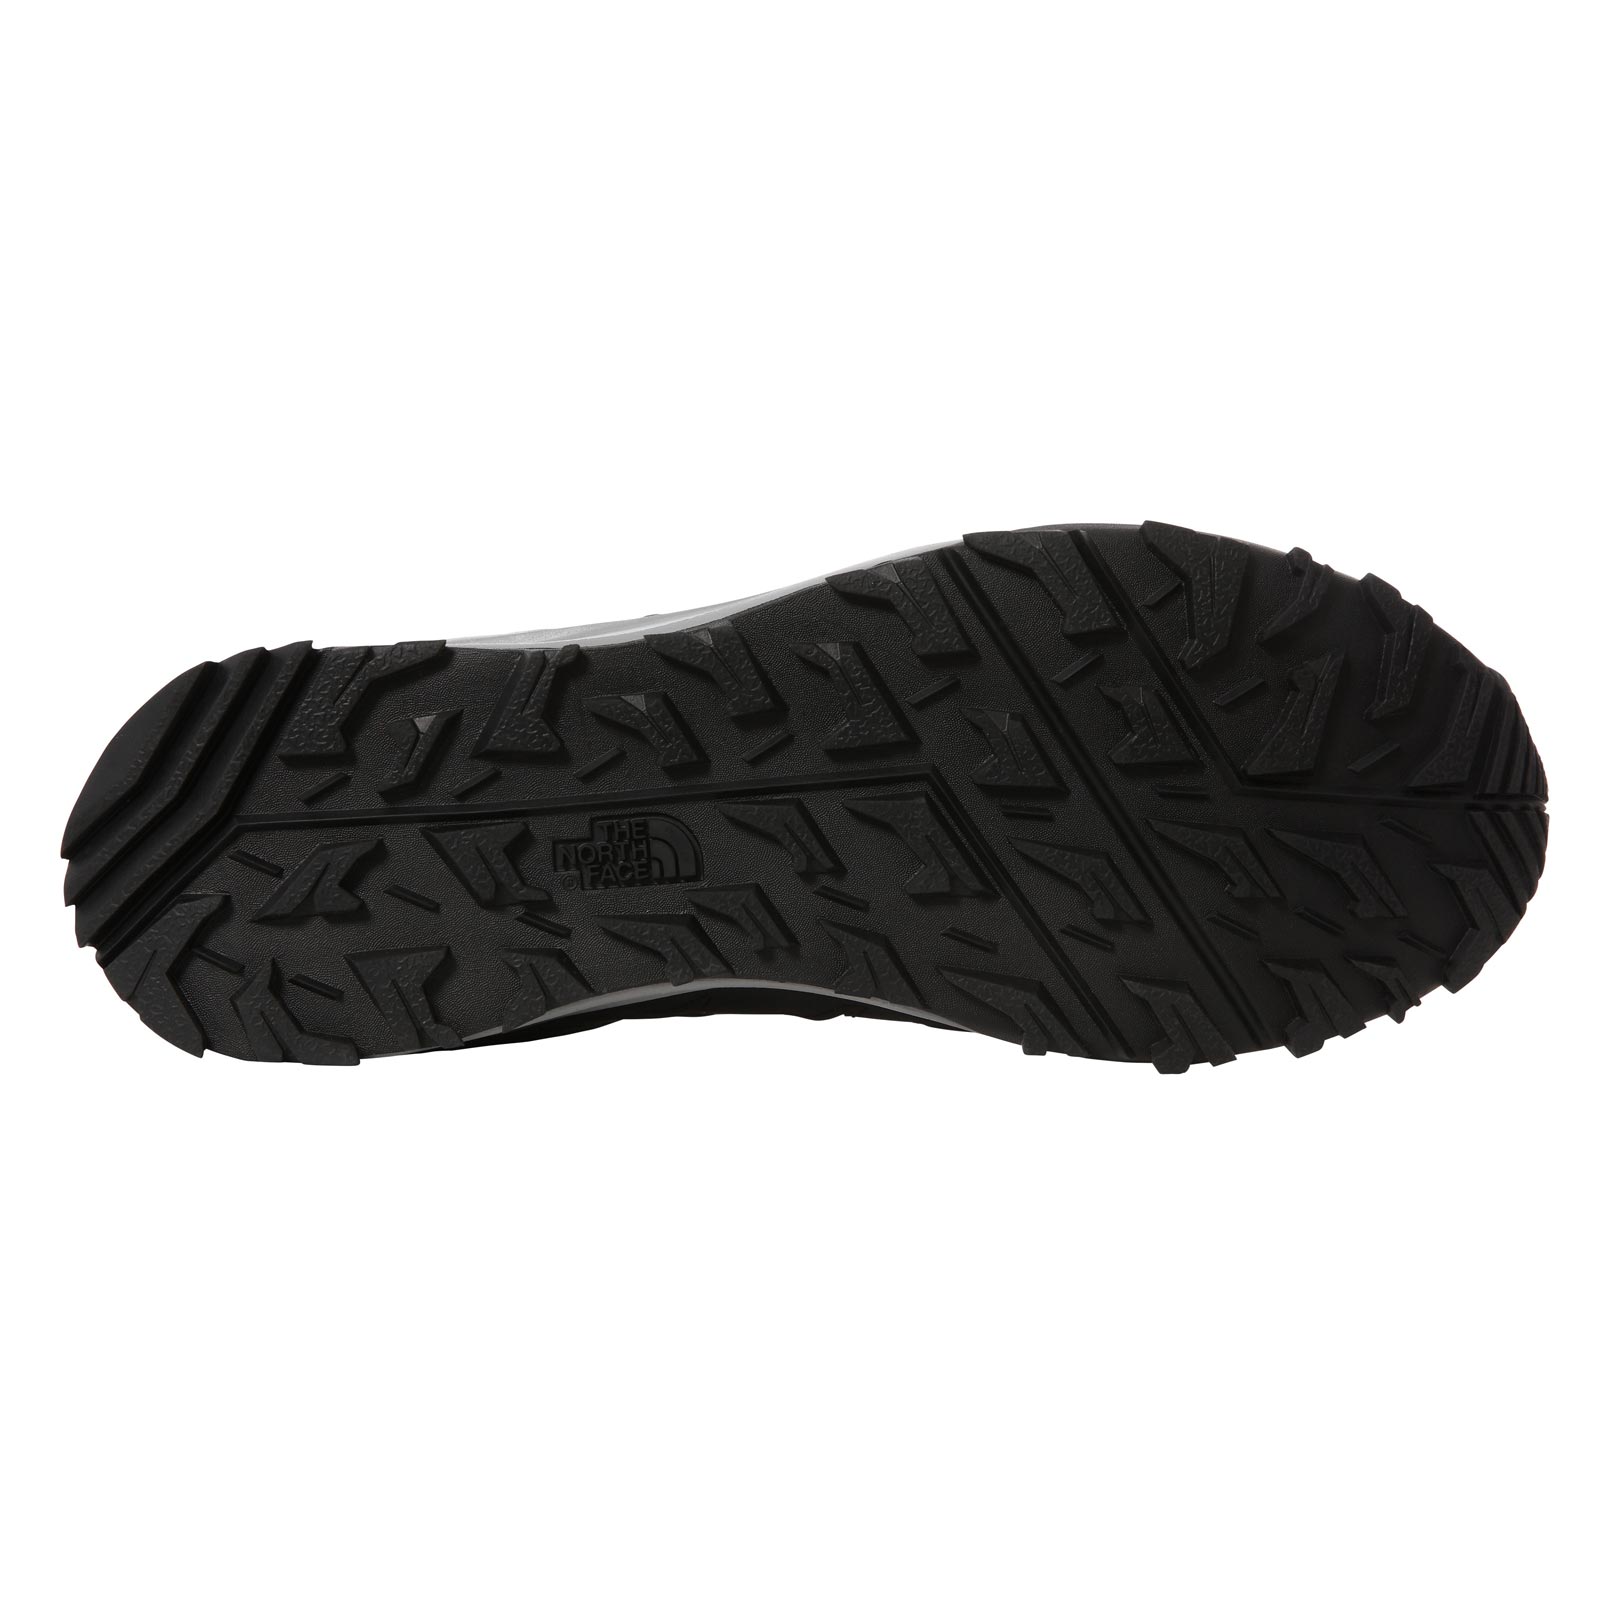 THE NORTH FACE VENTURE FASTHIKE II MENS HIKING SHOES